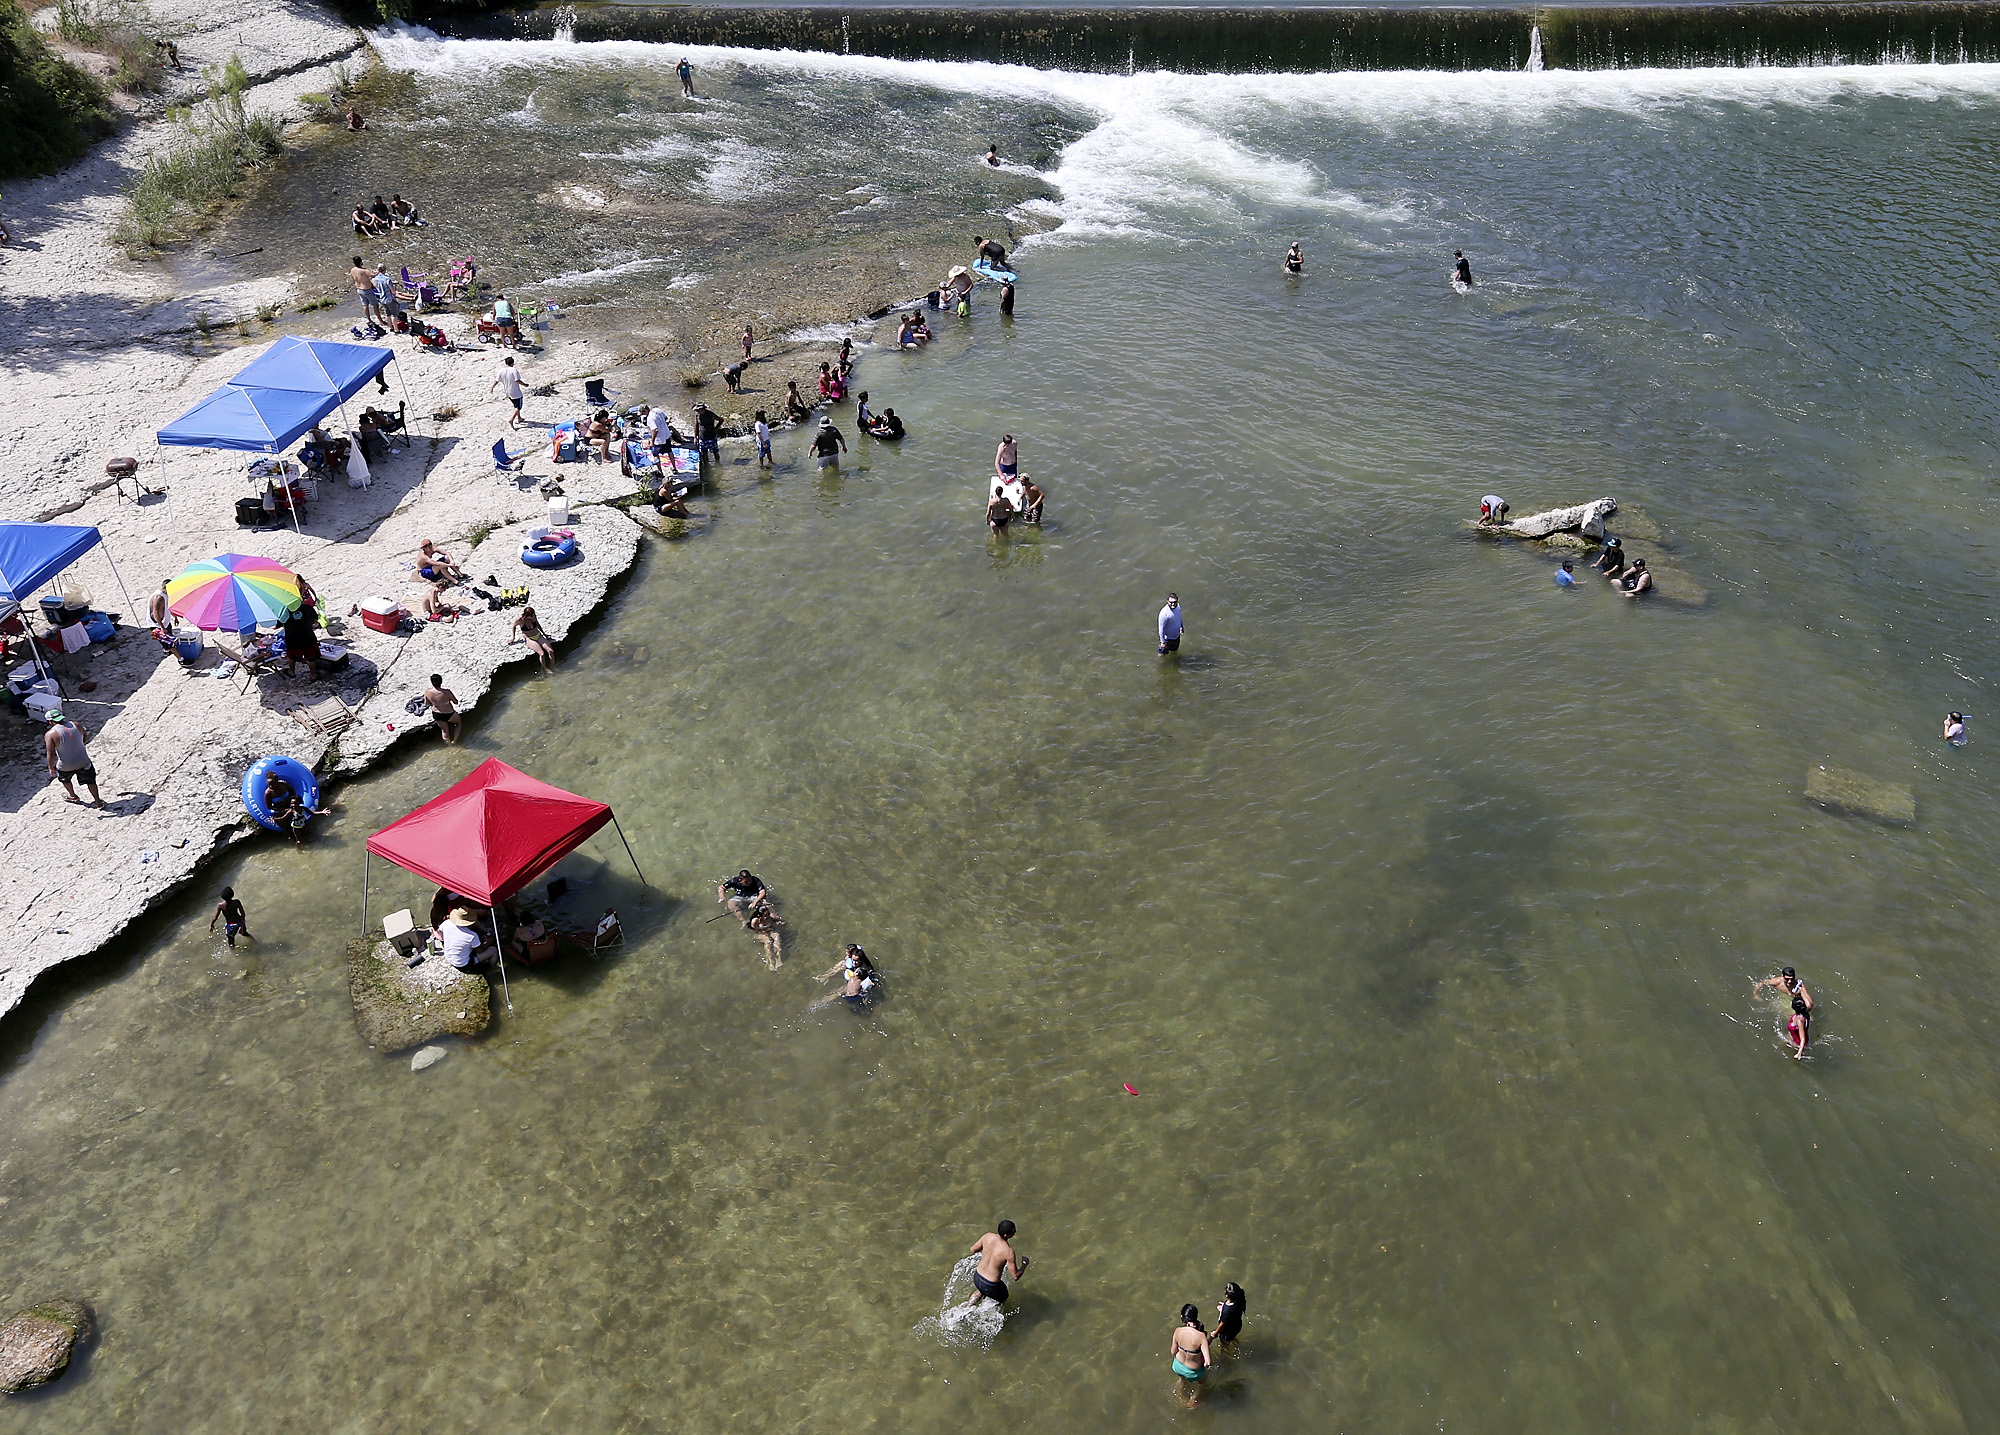 27-year-old man identified as Guadalupe River drowning victim photo